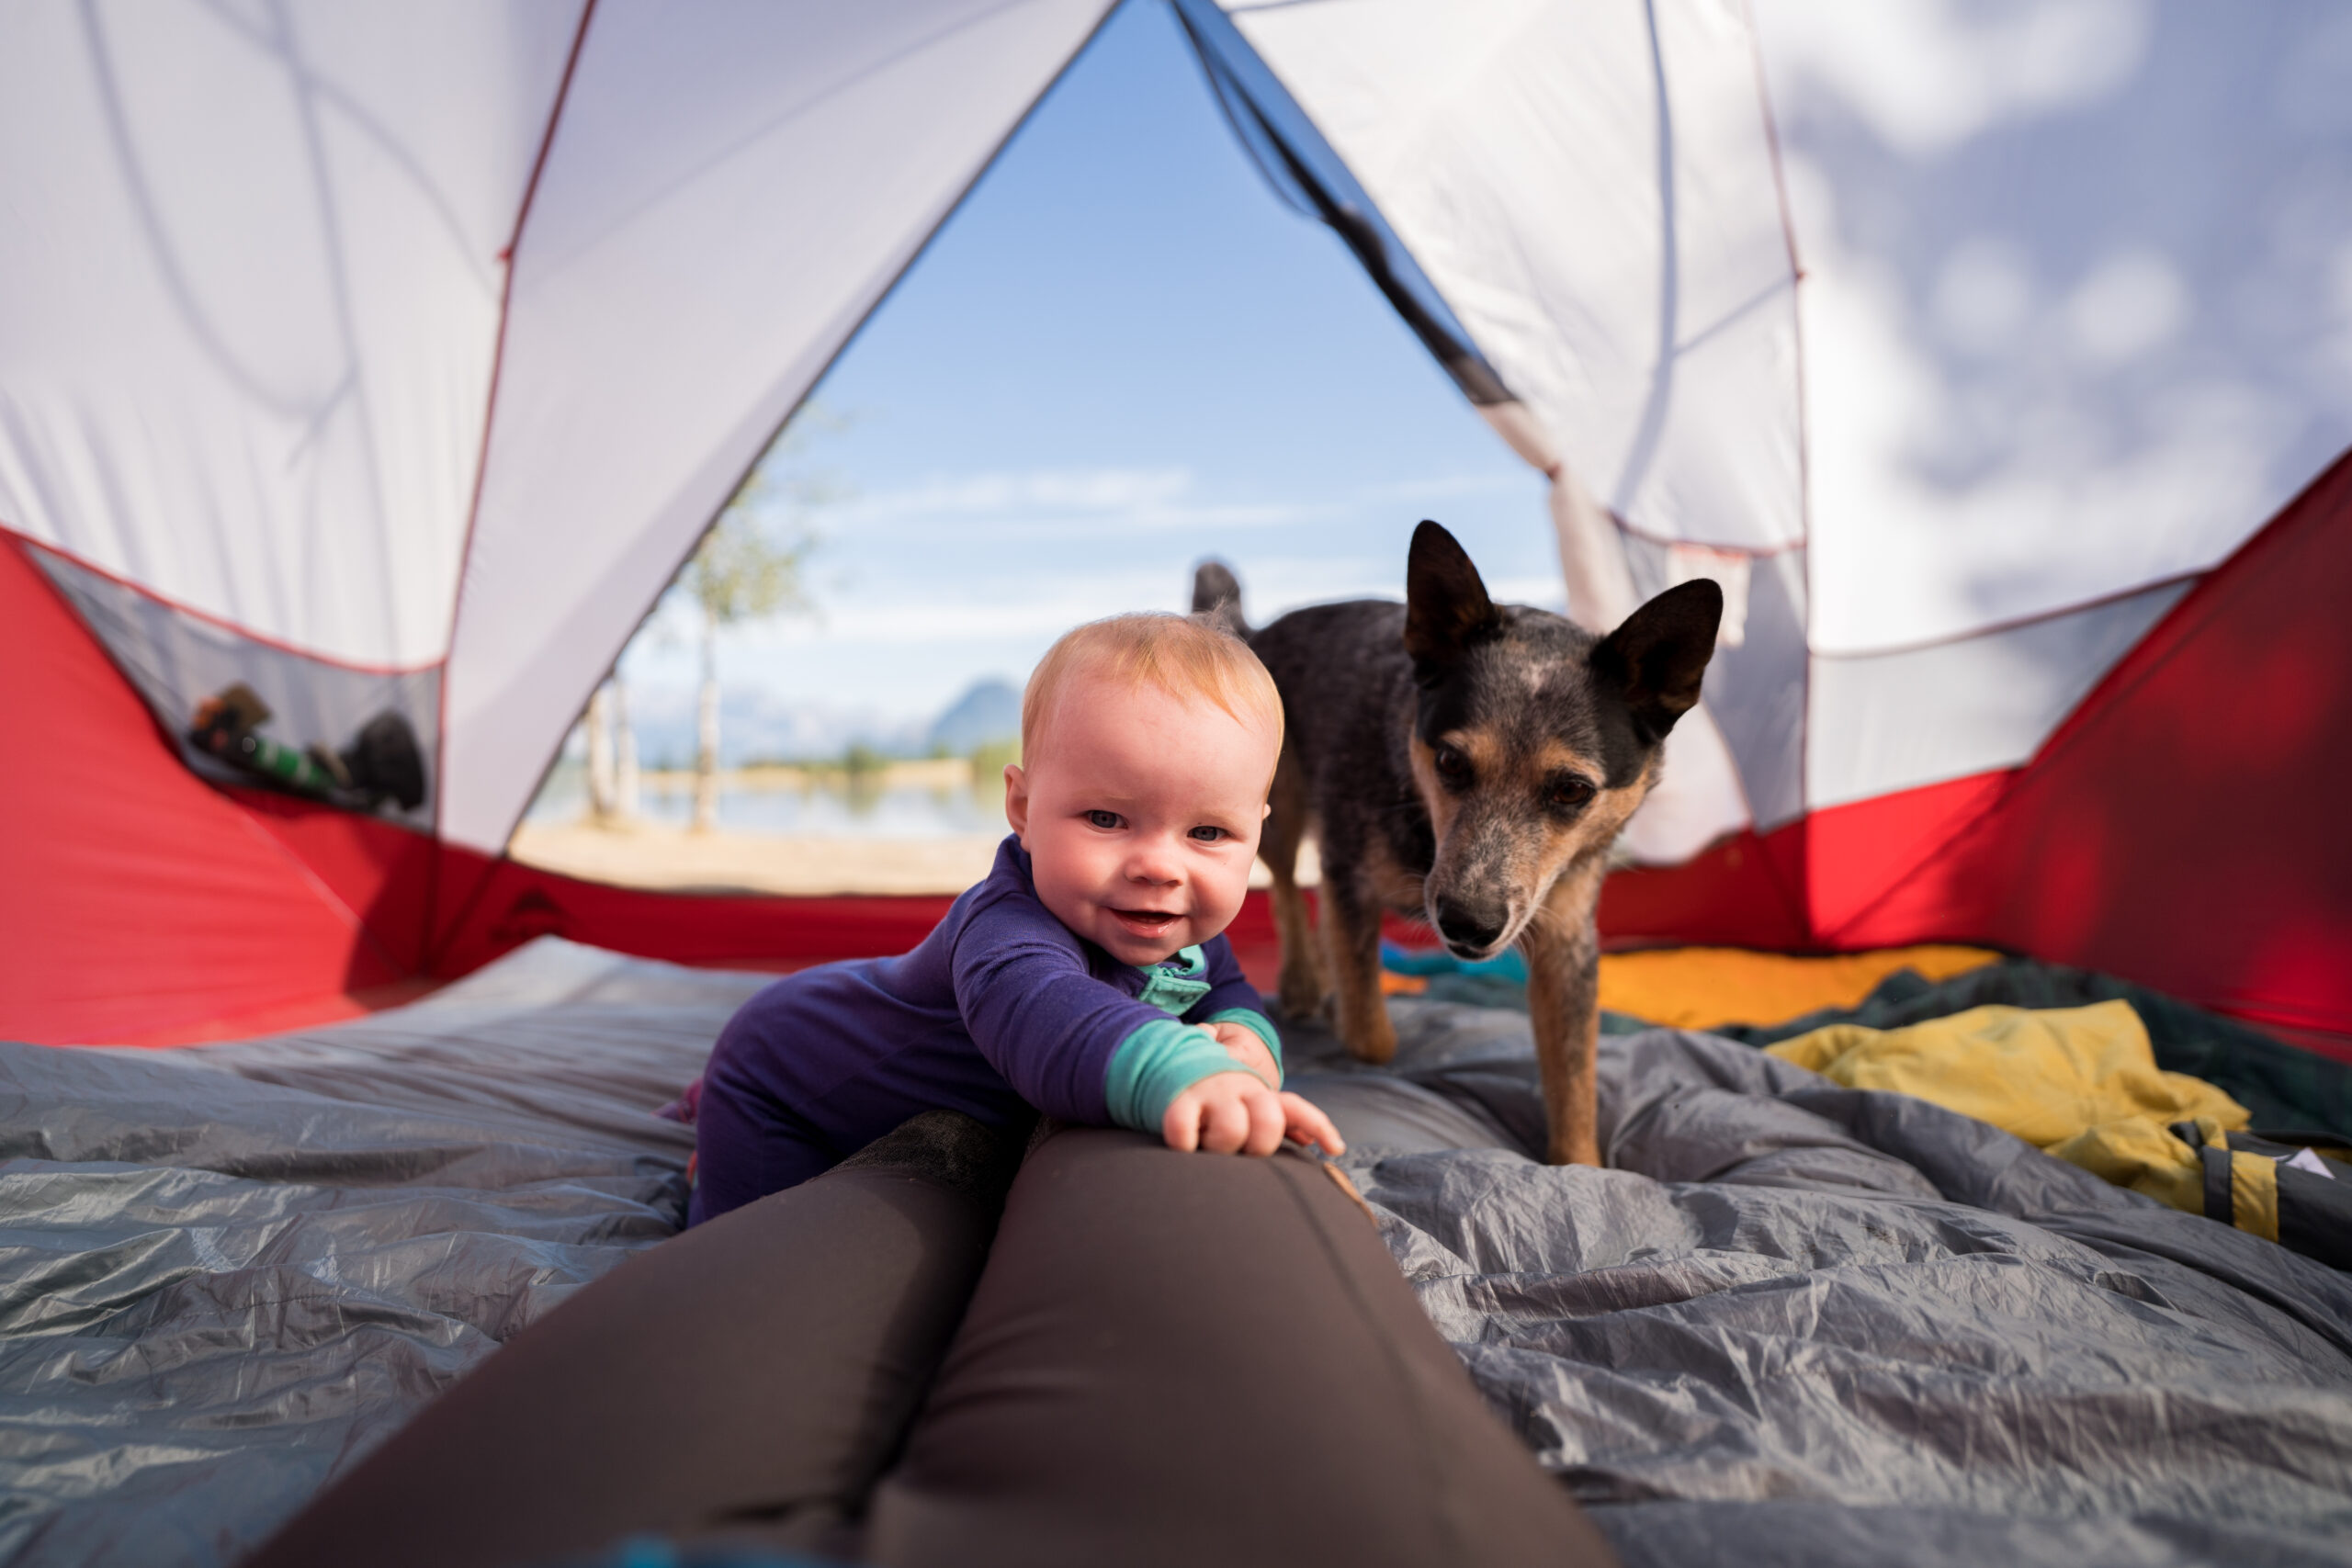 Baby inside of tent crawls up legs coming towards the camera with dog walking up behind her.